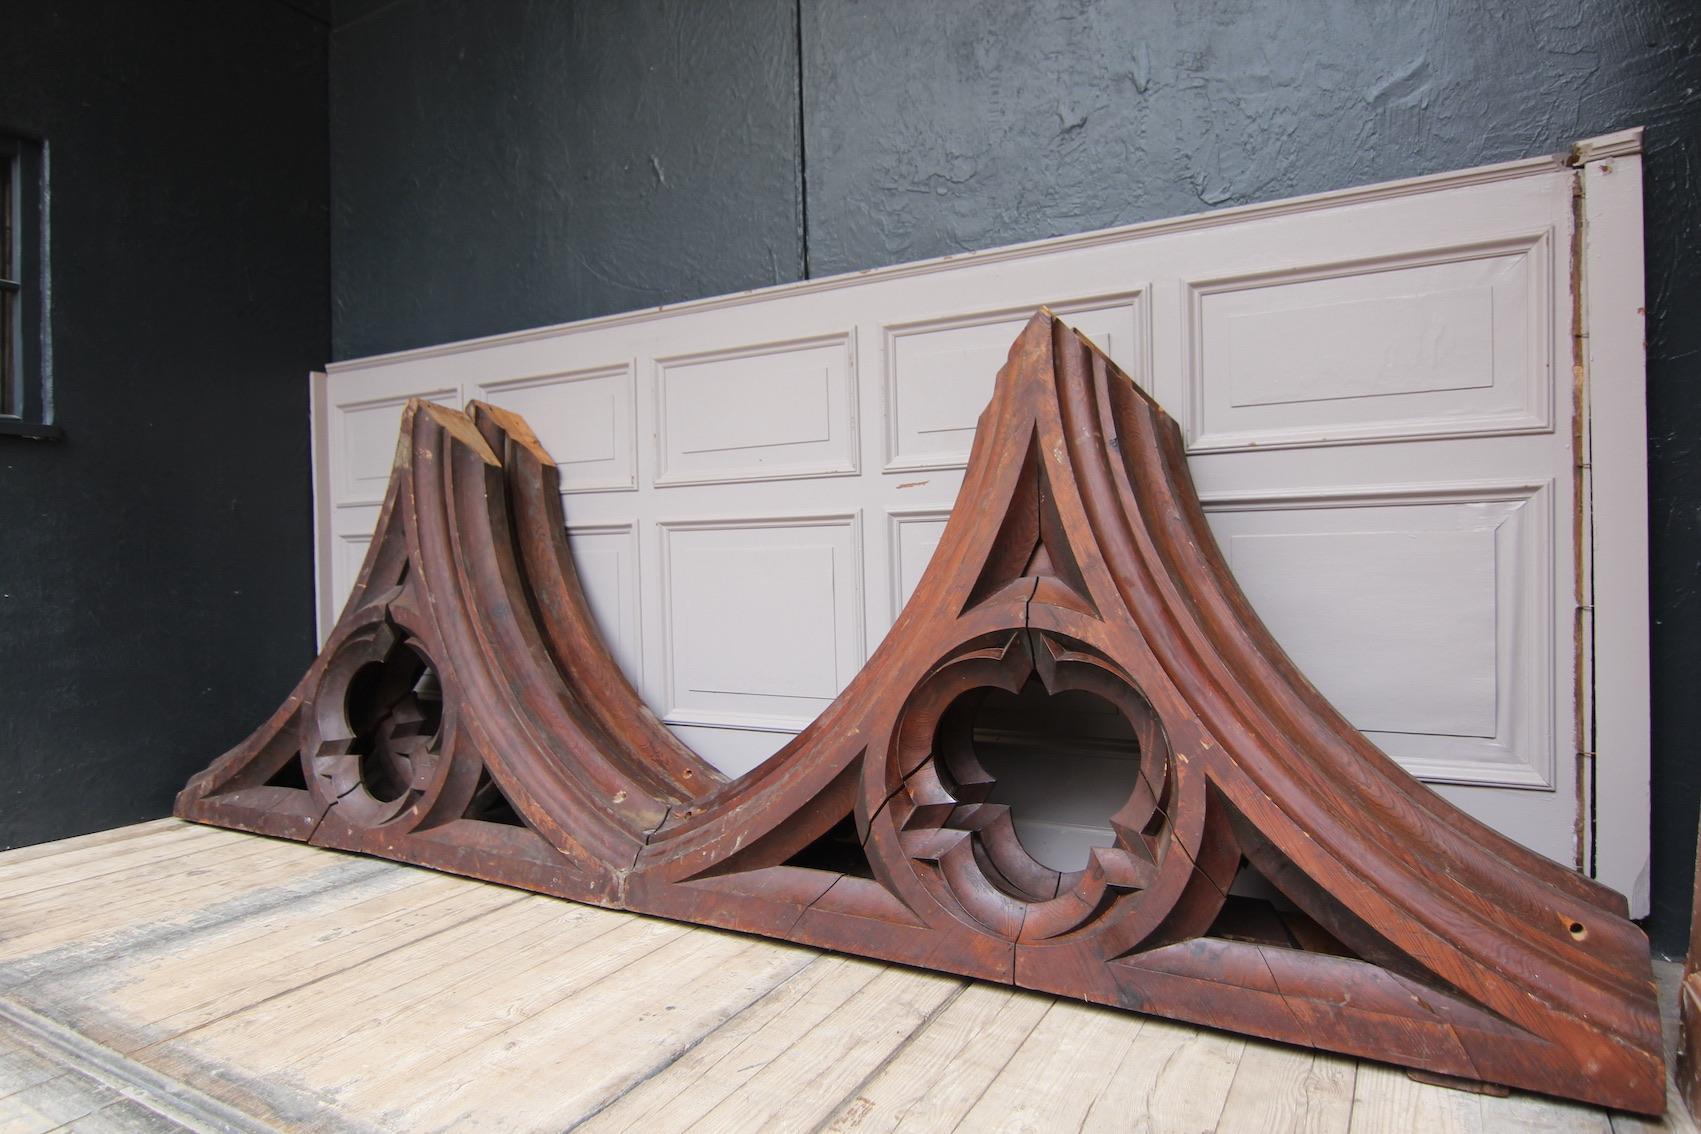 Pine Set of Gothic Revival Architectural Arcade Elements